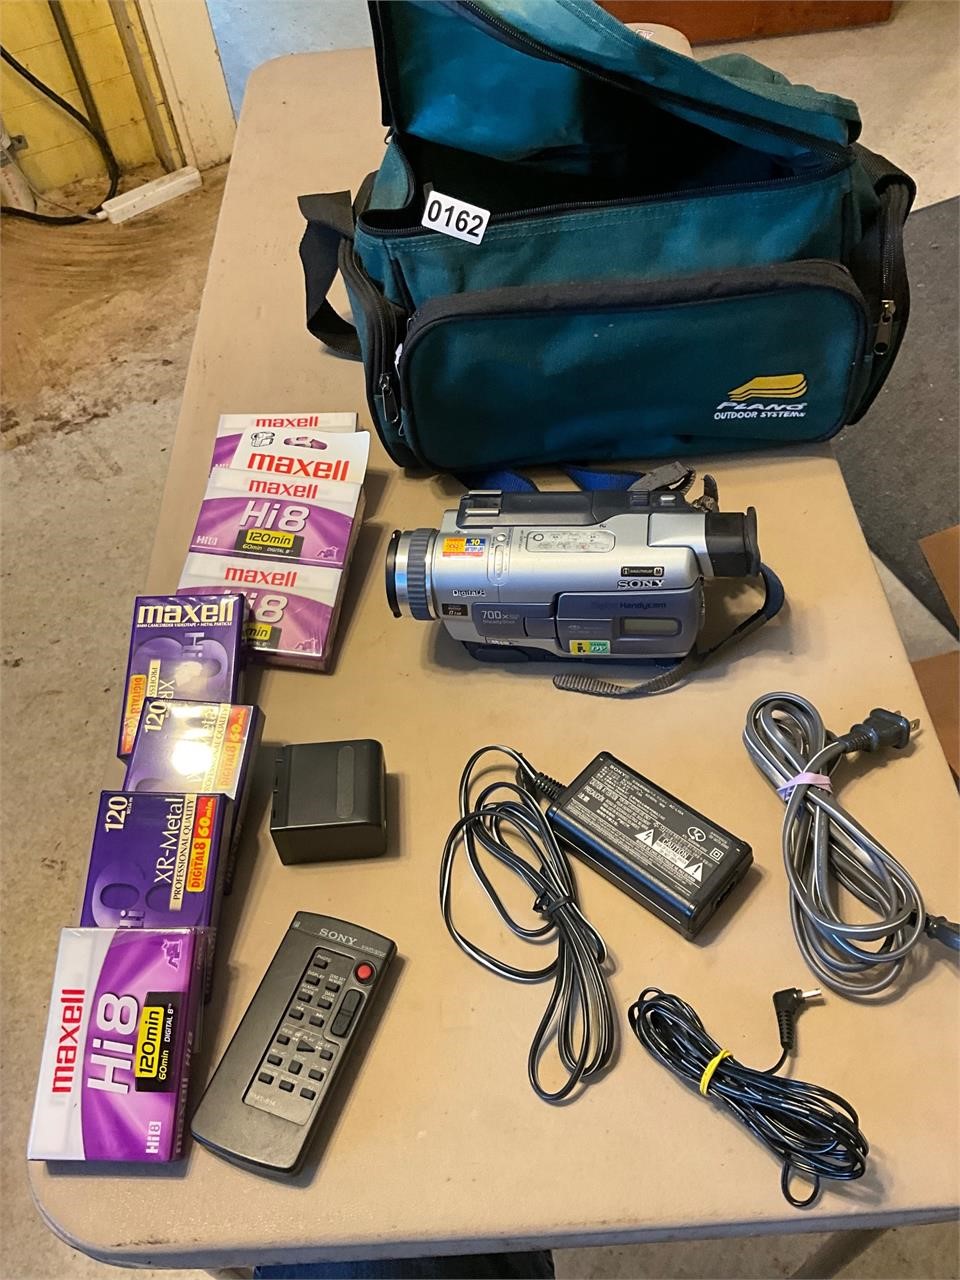 Sony Digital 8 Handycam- complete with tapes